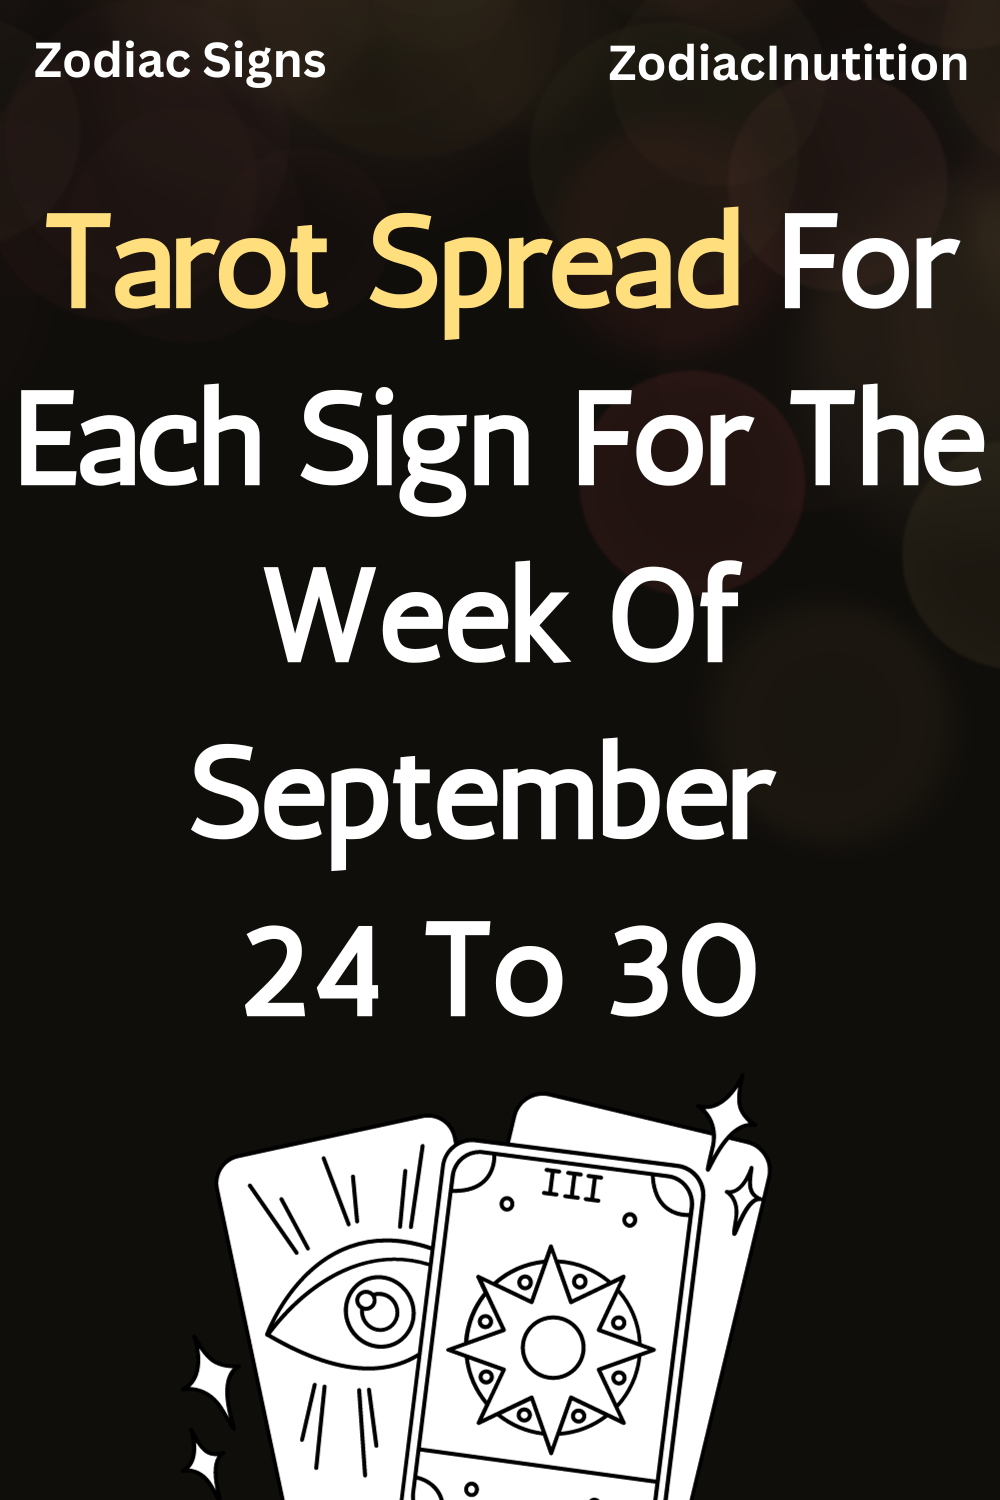 Tarot Spread For Each Sign For The Week From September 24 To 30